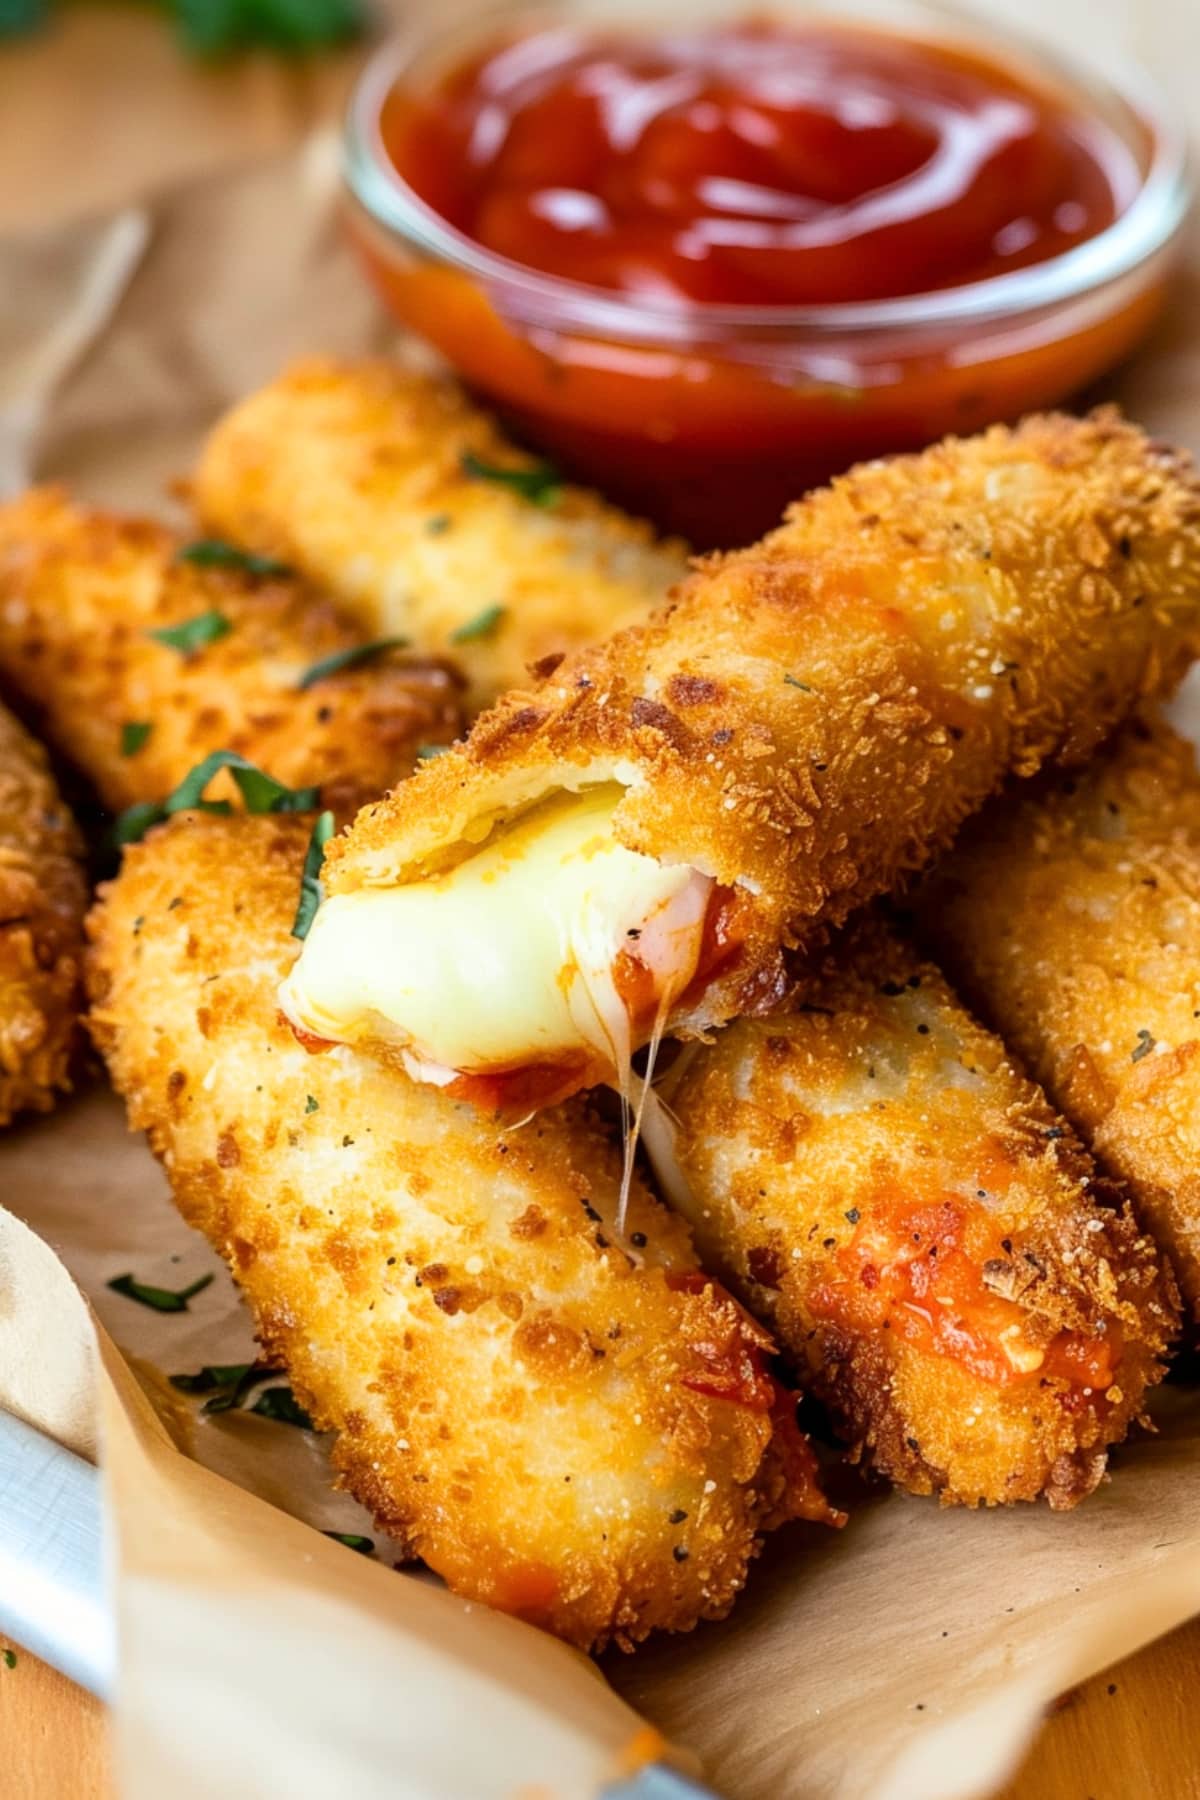 Homemade gooey and crunchy mozzarella sticks with ketchup on the side